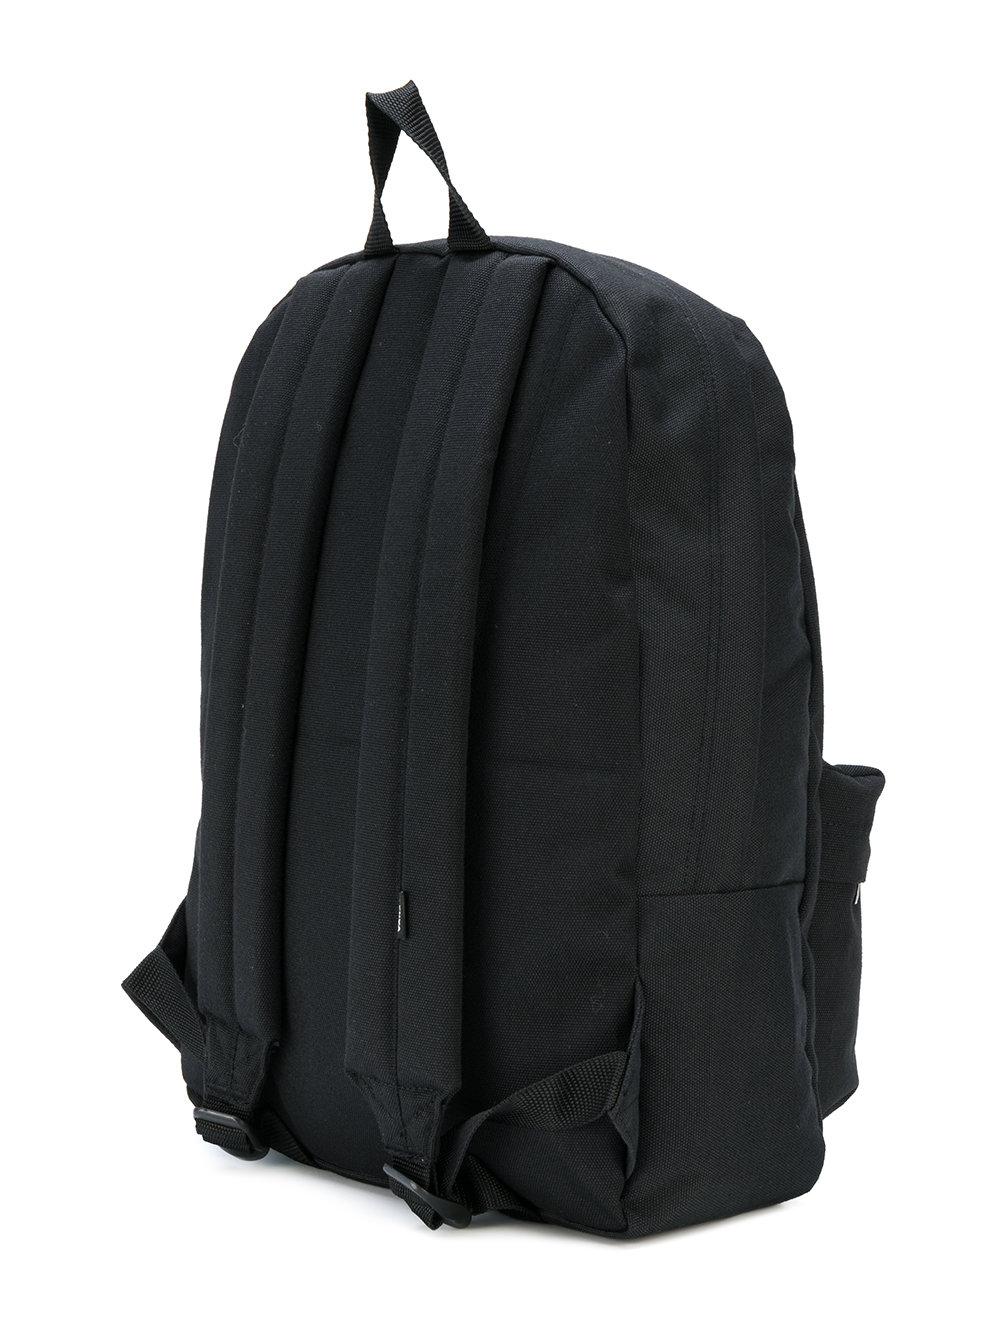 Vans Synthetic Snoopy Patch Backpack in Black for Men - Lyst